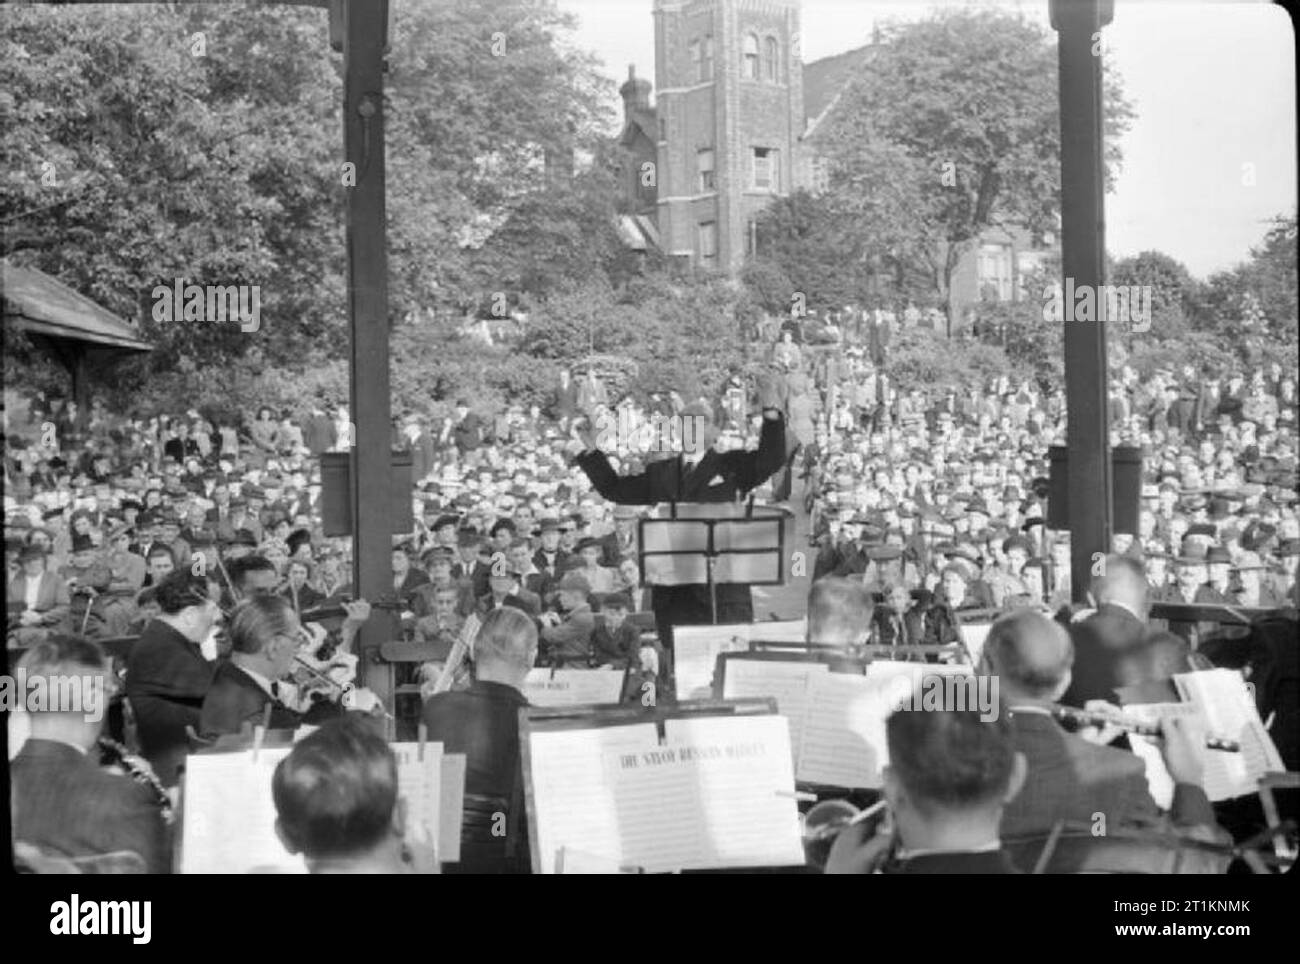 Music Goes To War- Entertainment in Wartime London, England, UK, 1943 Jack Gold conducts his Variety Orchestra in 'The Savoy Russian Medley' on the bandstand in the Horniman Gardens, Forest Hill. The musicians can be seen in the foreground, including those playing the flute, trumpet, violin and clarinet. In the background, the crowd can be seen, enjoying the music in the evening sunshine. Stock Photo